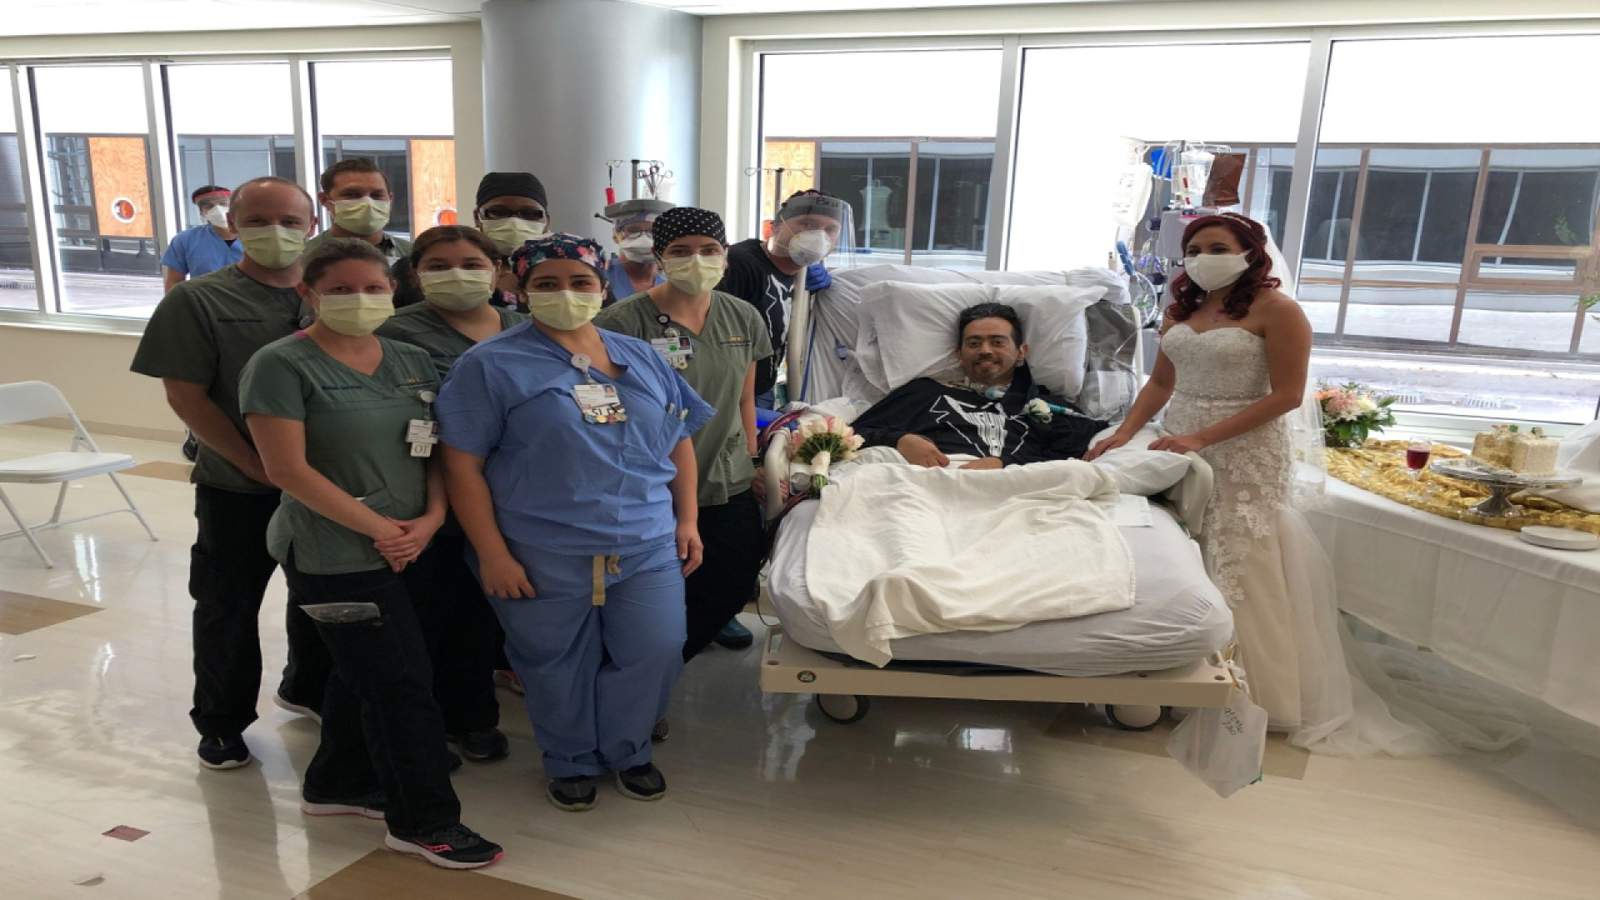 ‘COVID-19 really can’t stop love’: San Antonio patient marries fiancée while battling virus in hospital